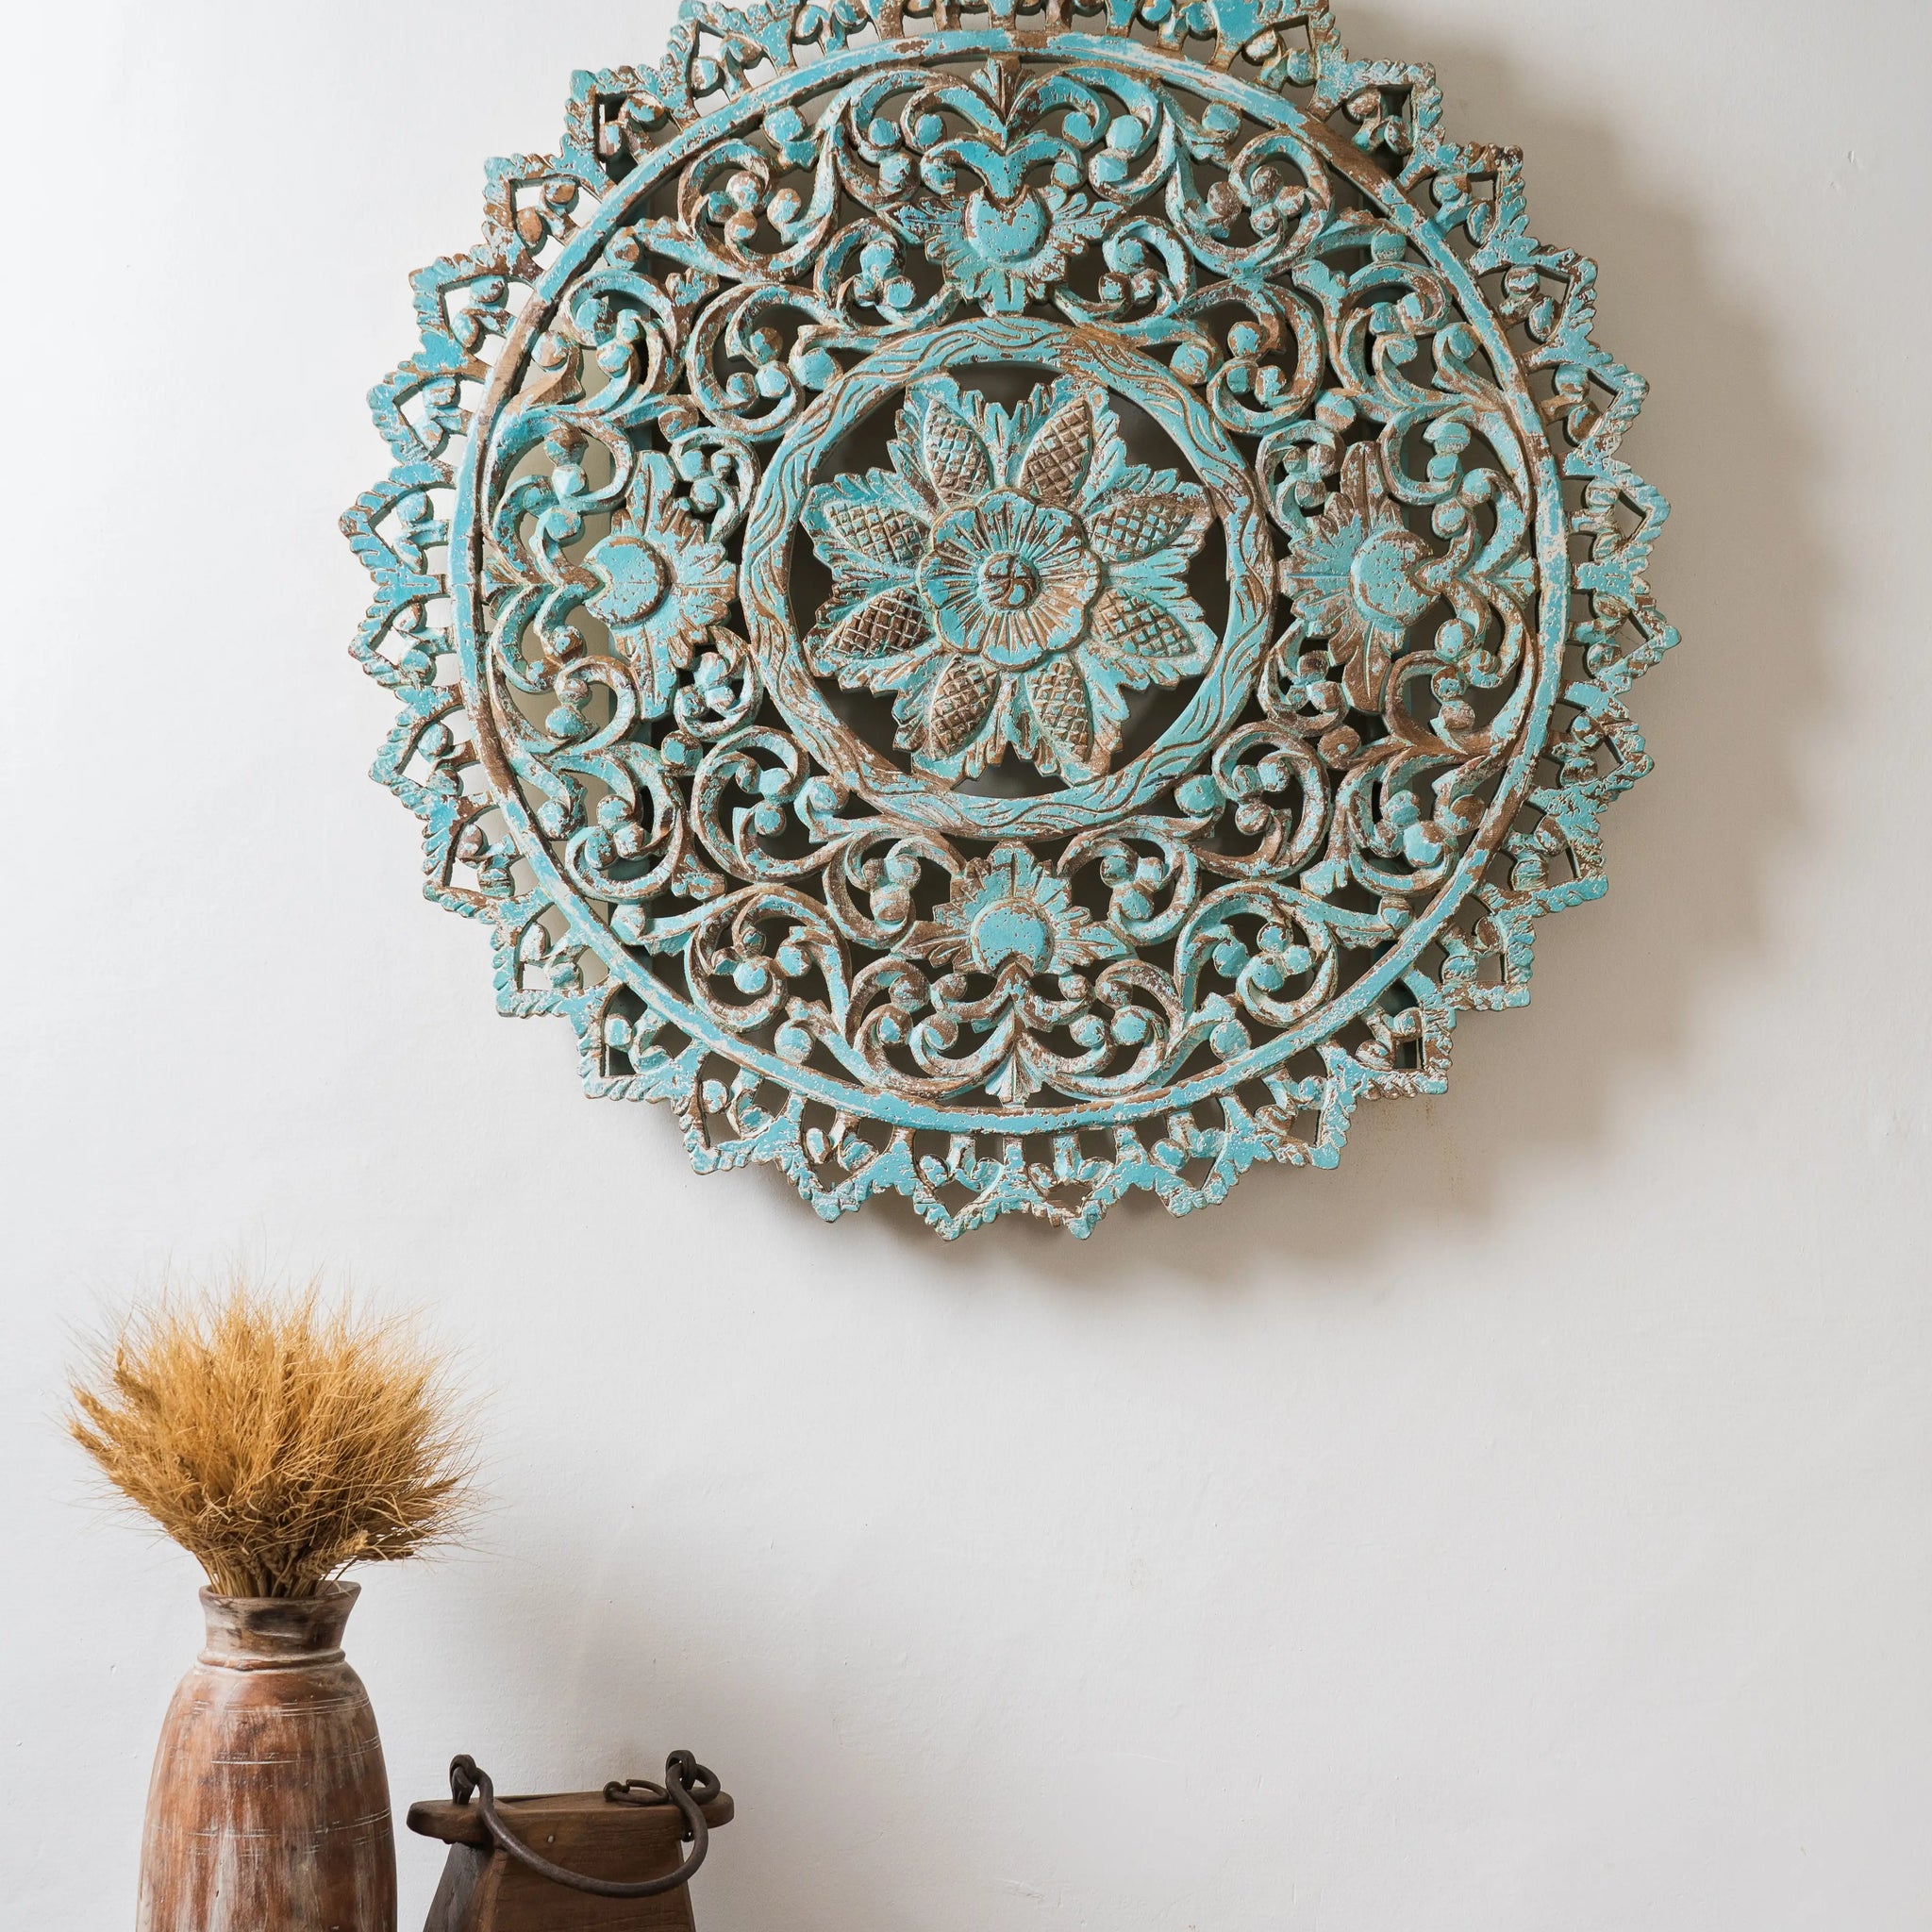 VINTAGE CARVED TURQUOISE WALL DECOR,  Antique-style wall décor, Artistic wall panel, Decorative wooden panel, Detailed carving wall panel, Handcrafted wall décor, Home accent décor, Preserved wooden wall décor, Rustic charm wall décor, Rustic turquoise wall décor, Turquoise home décor, Turquoise wall art, Unique wall décor, Versatile wooden panel, Vintage carved turquoise wall décor, Vintage-inspired wall décor, Wall hanging panel, Wooden panel with hook,tesu 